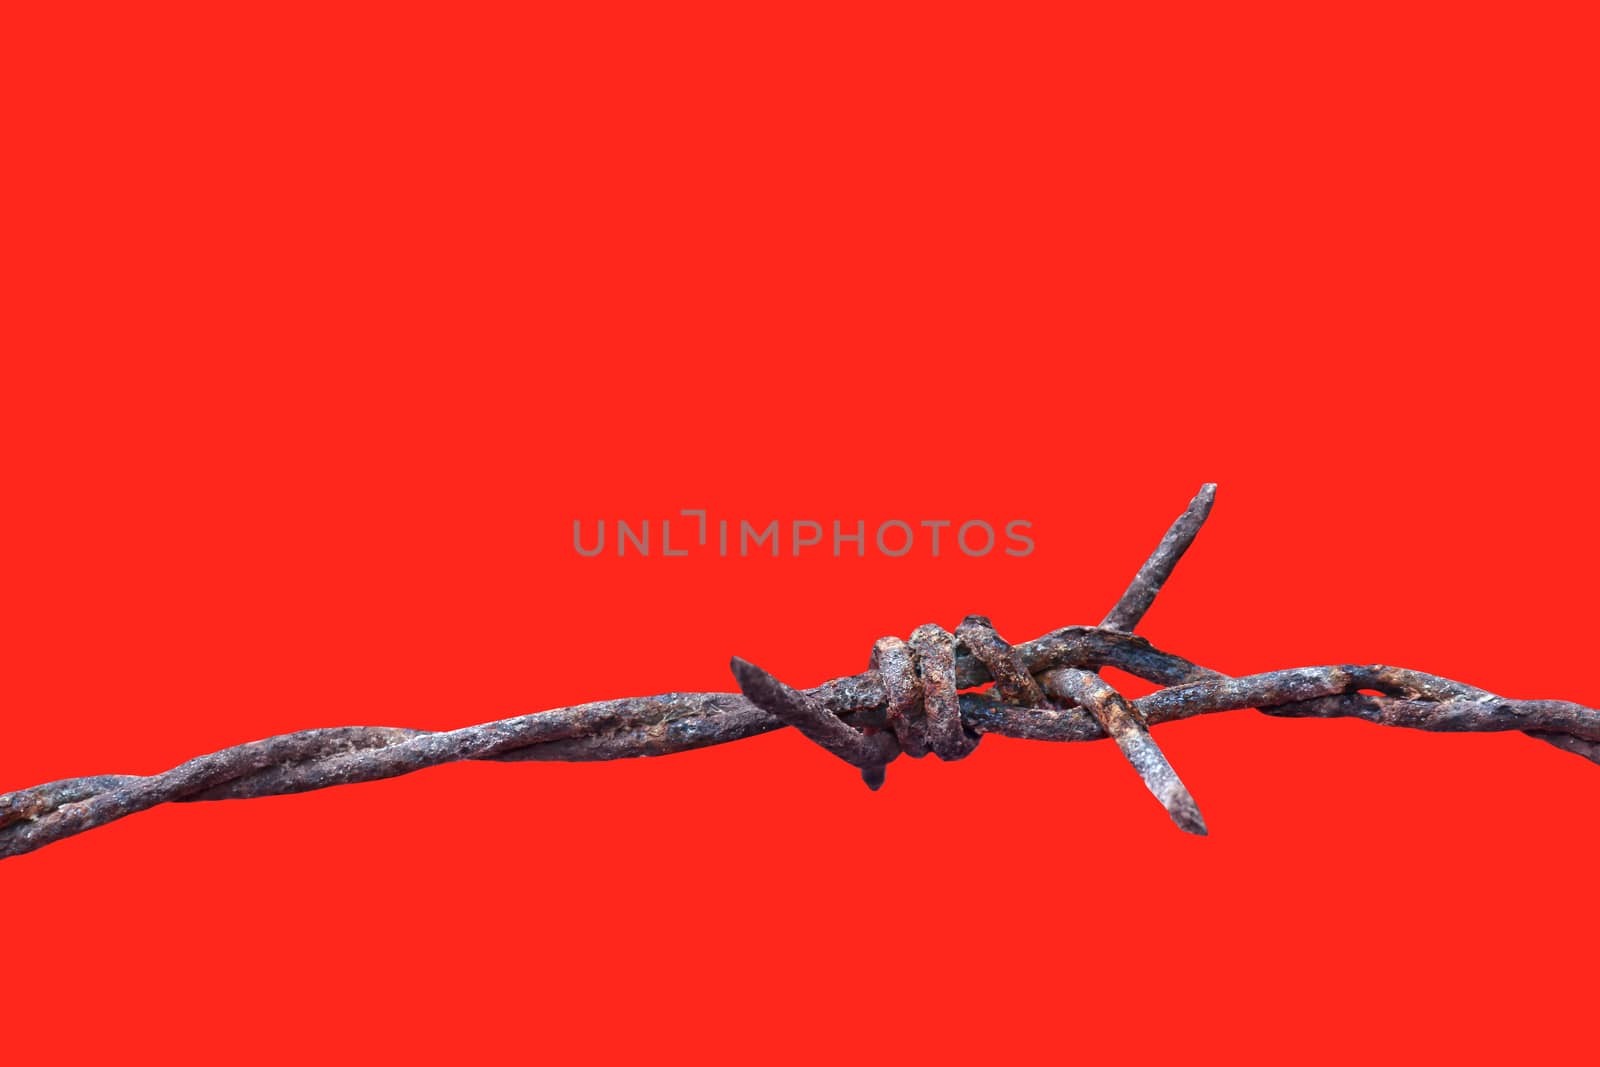 barbed wire rust old isolated on red background, barbed wire rusty meaning to incarcerate, imprison, detention center, incarceration by cgdeaw